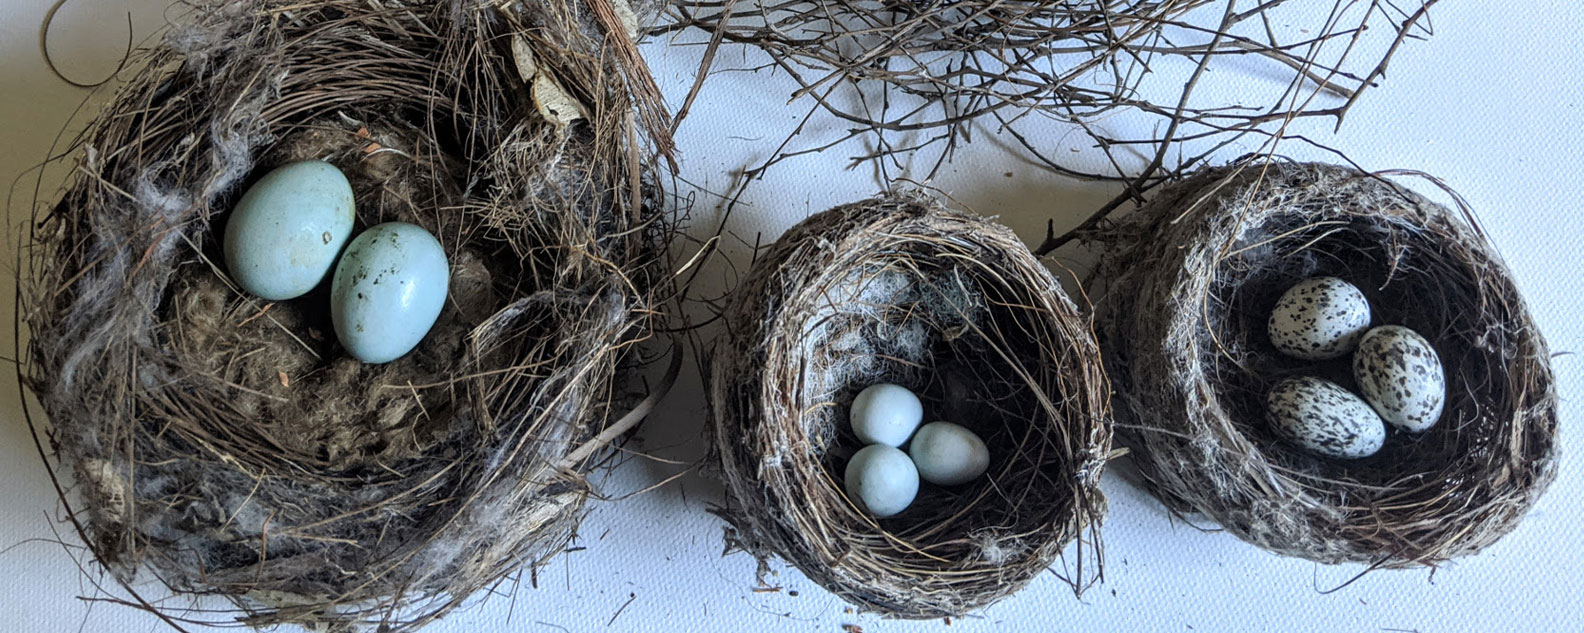 Nests, eggs and life cycles